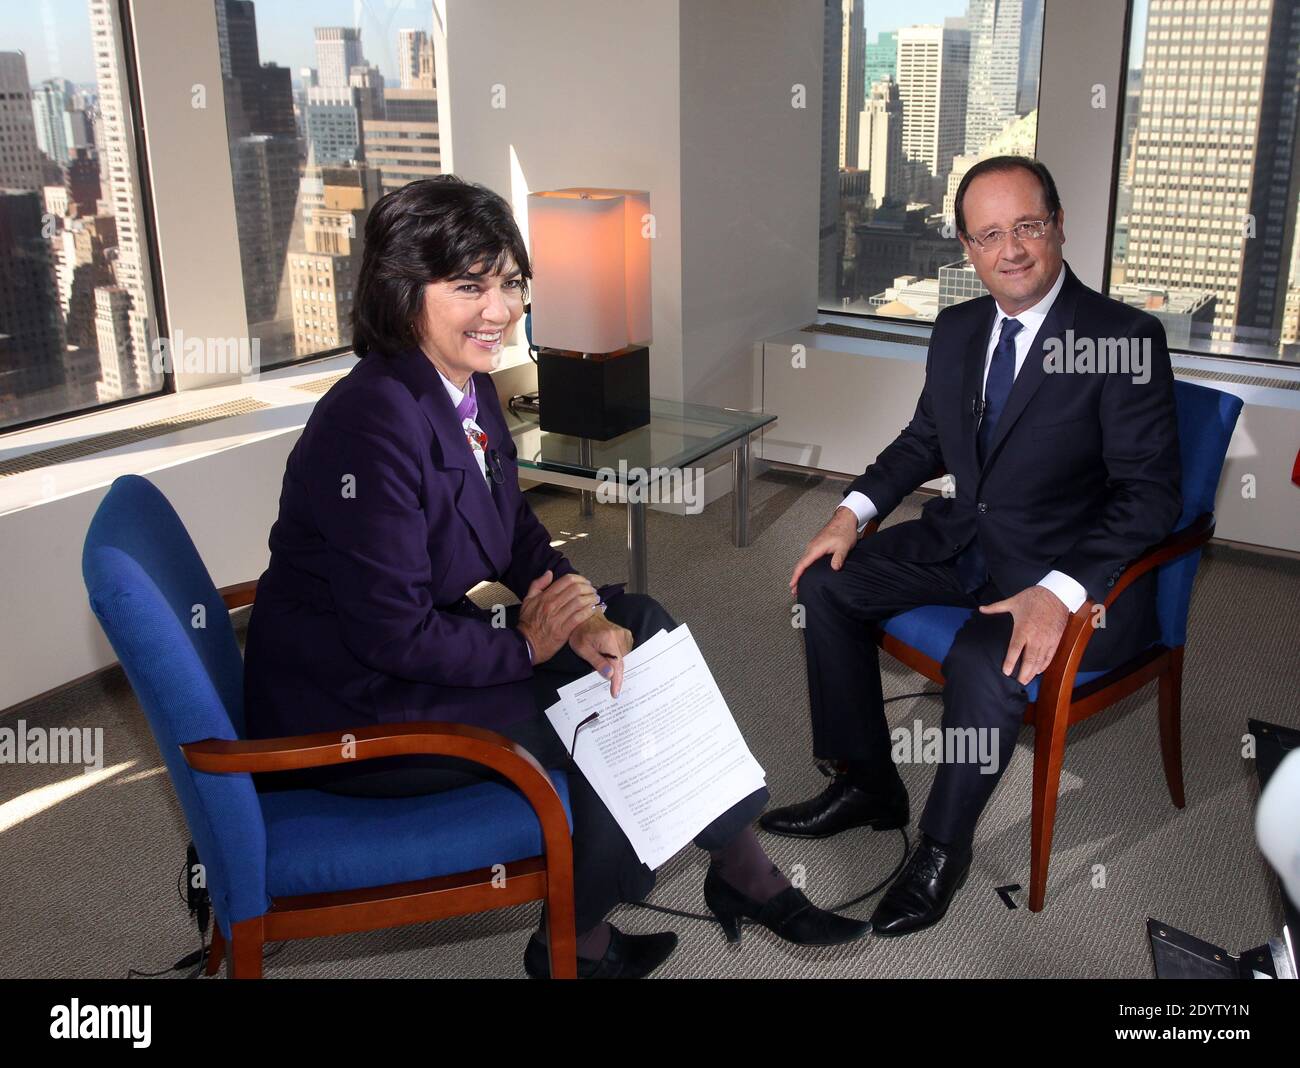 French President Francois Hollande meets with CNN Chief International Correspondent Christiane Amanpour for an interview at the Permanent Mission of France to the United Nations during the 68th session of the UN General Assembly in New York City, NY, USA on September 24, 2013. Photo by Charles Guerin/ABACAPRESS.COM Stock Photo